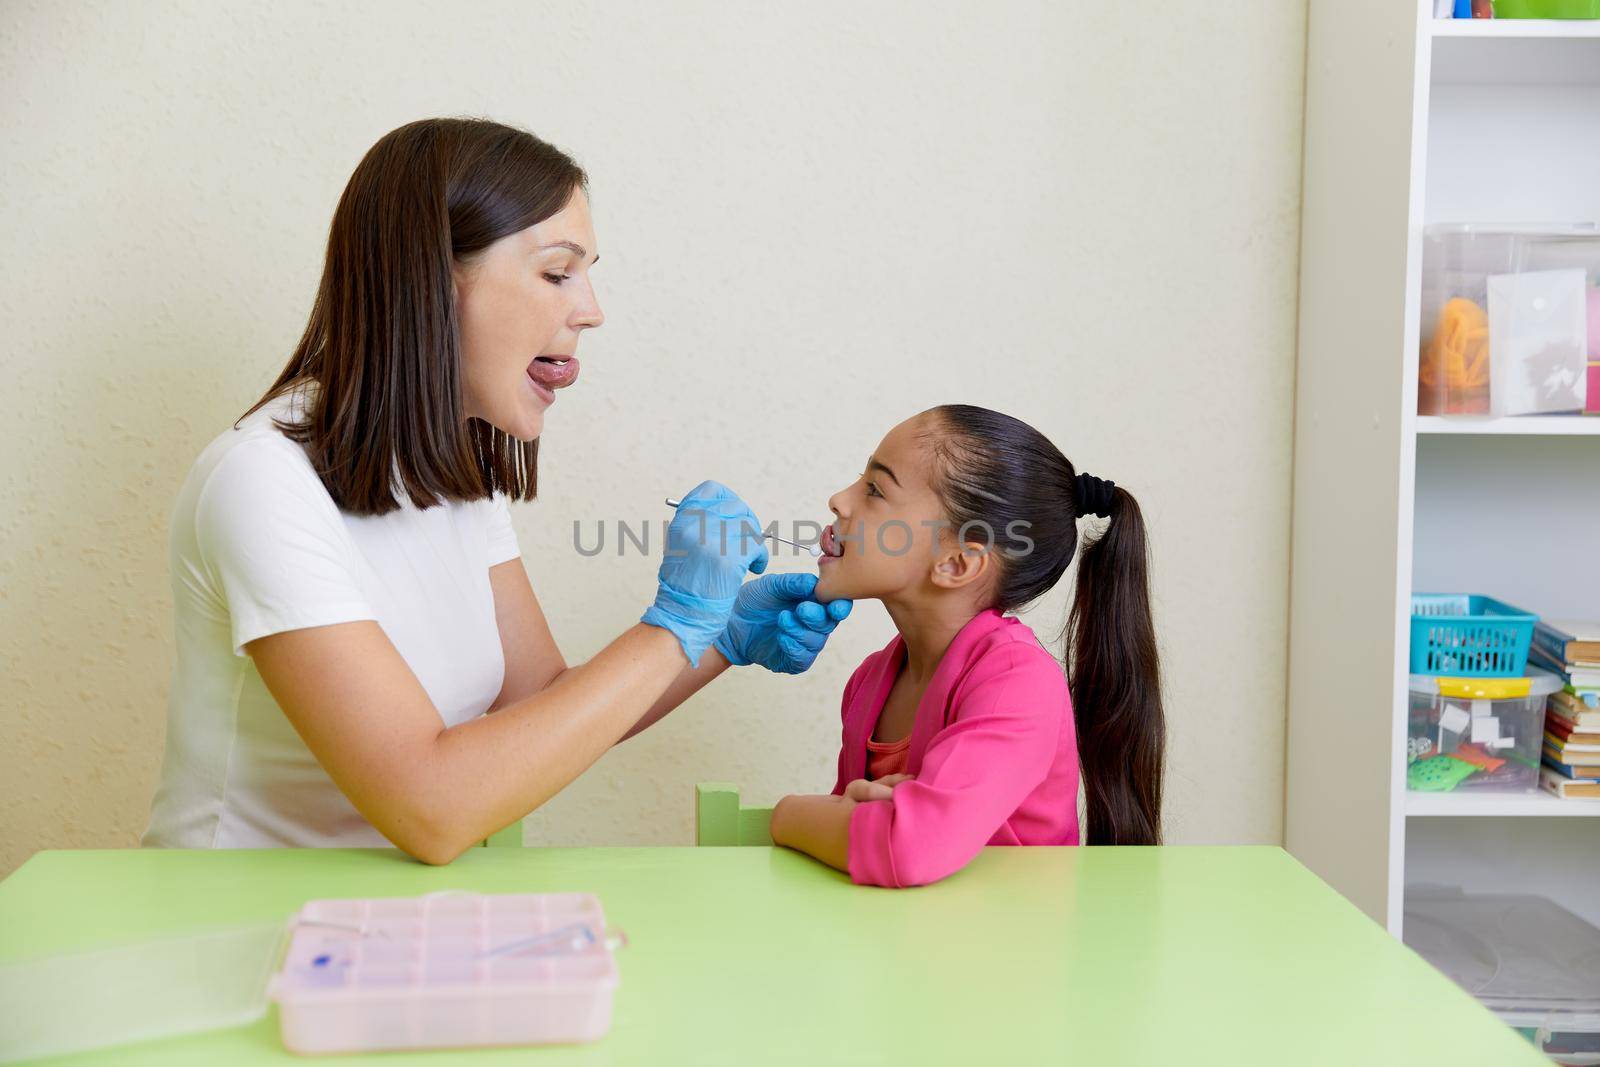 Speech therapist working with little girl in office training correct pronunciation